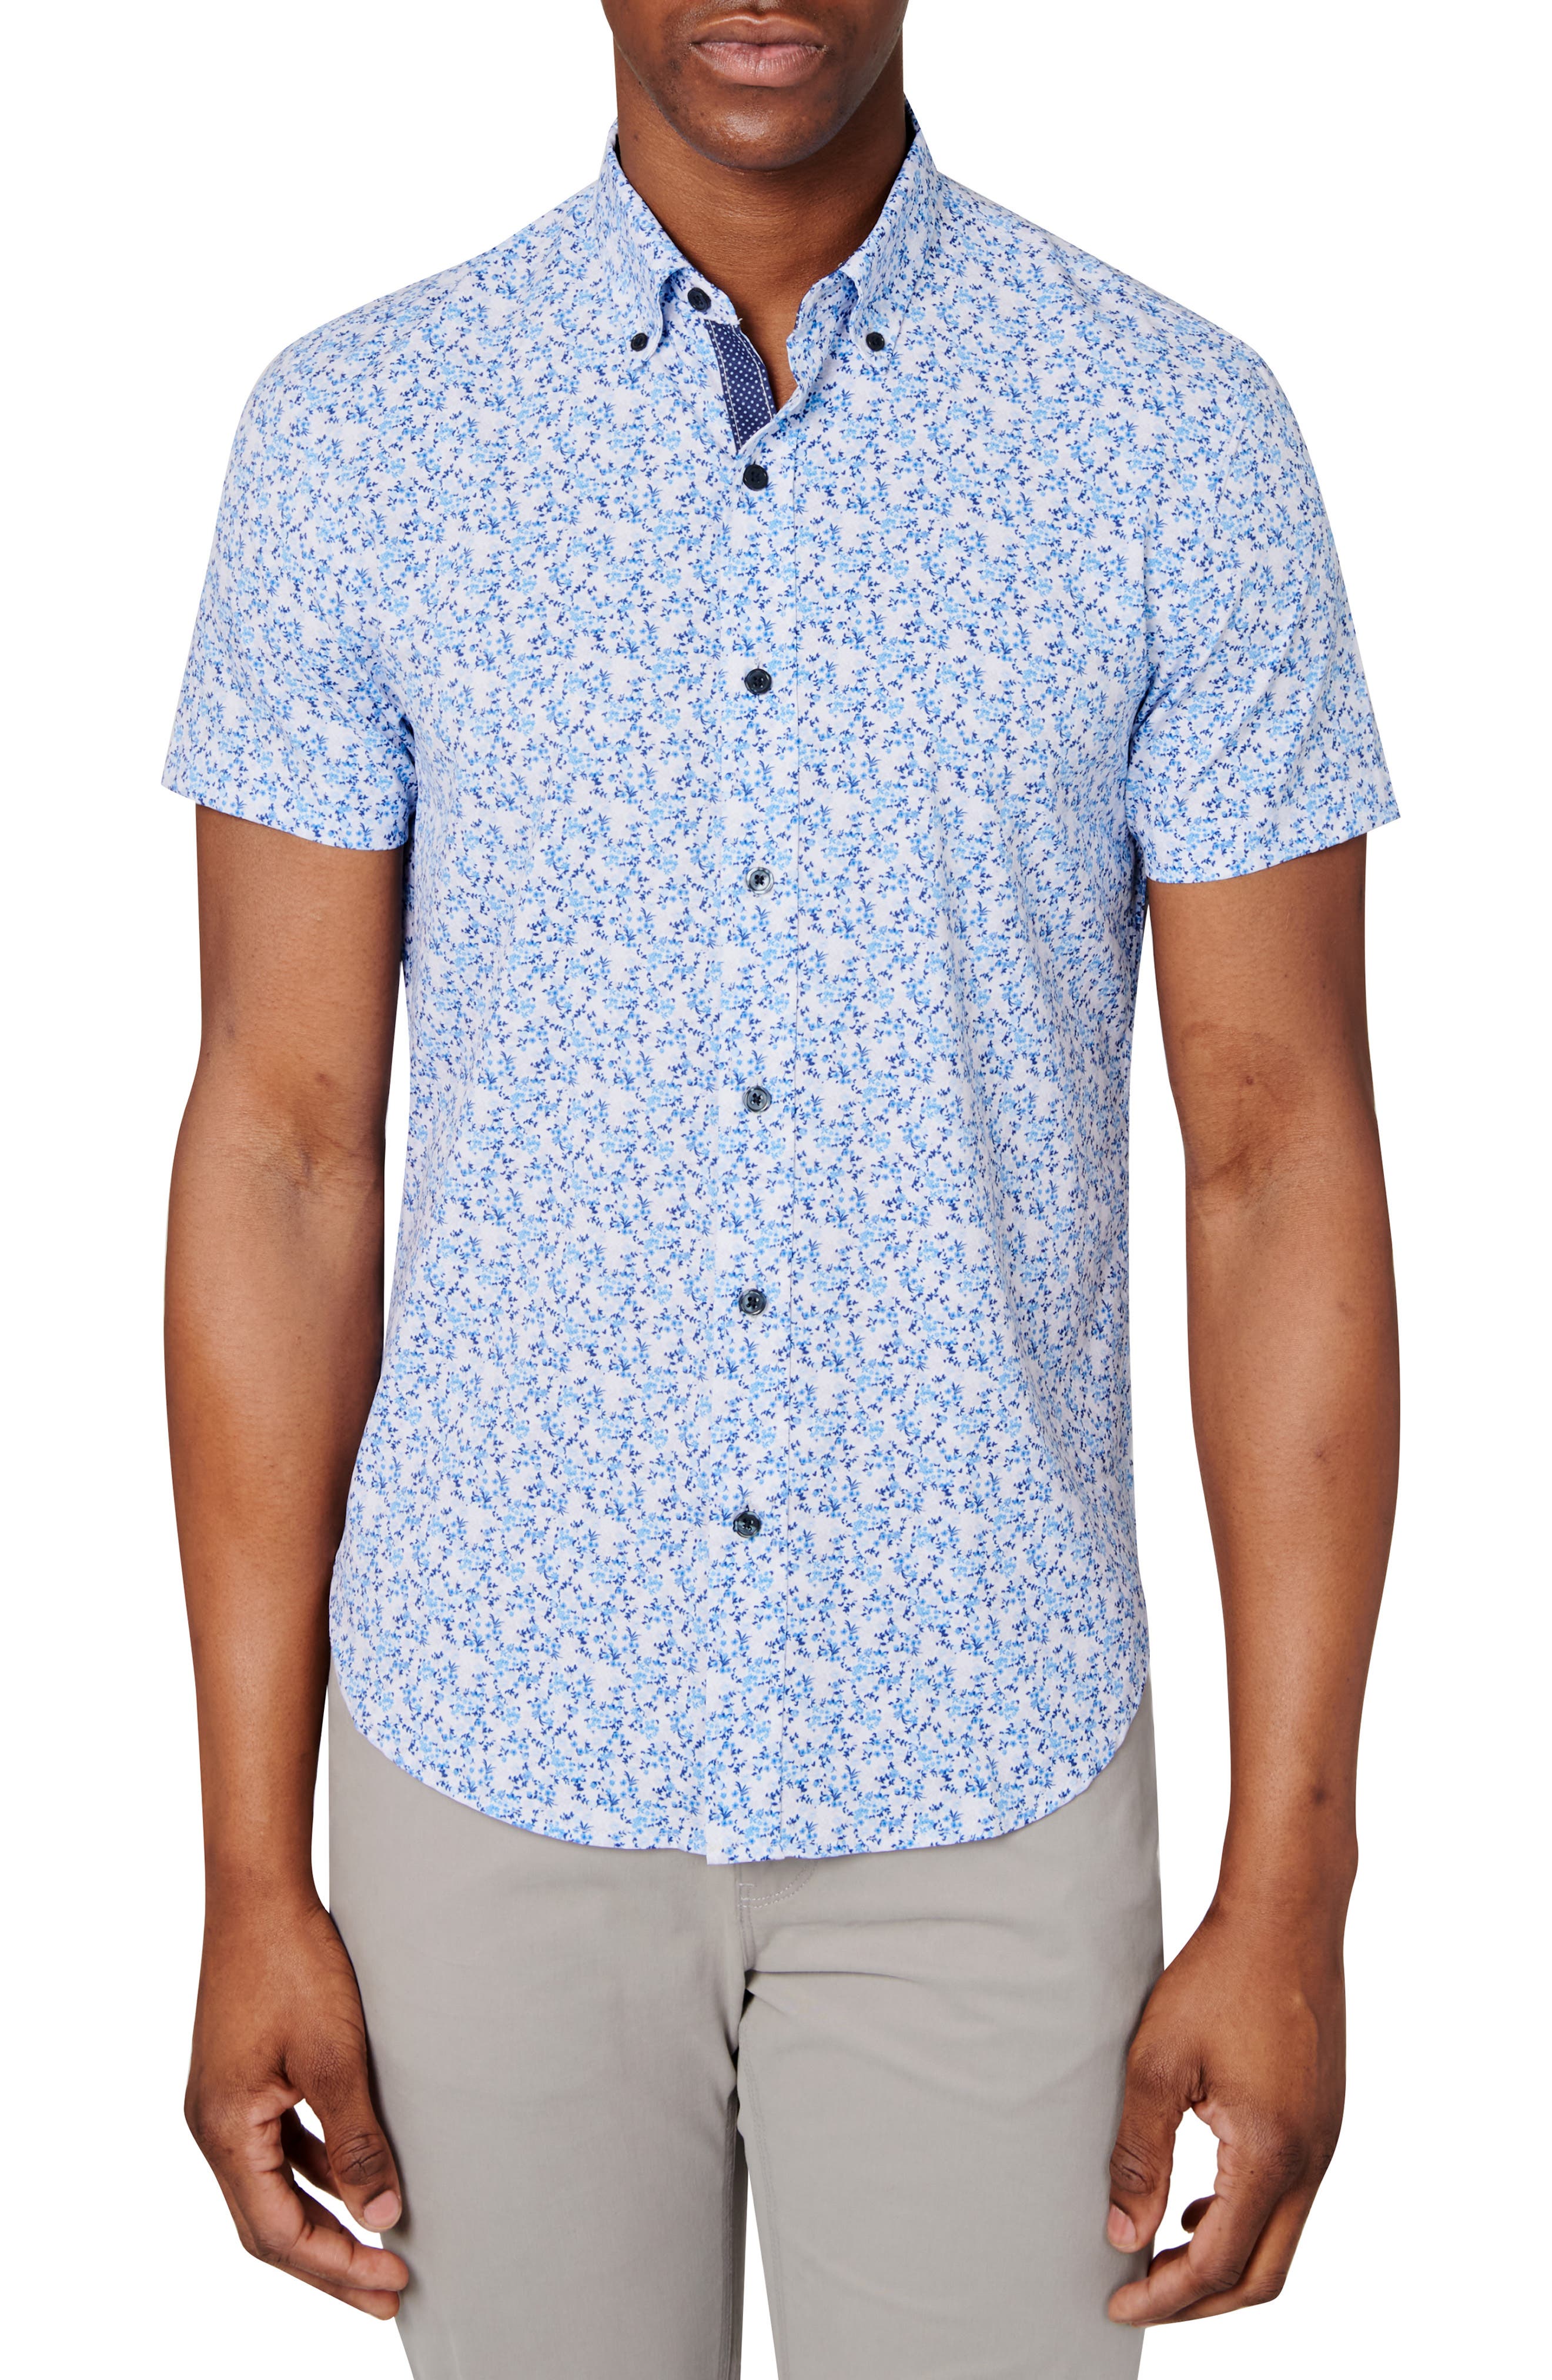 SAPPHIRE LOUNGE Mens Short Sleeve Casual Novelty Printed Button Down Woven Shirt 